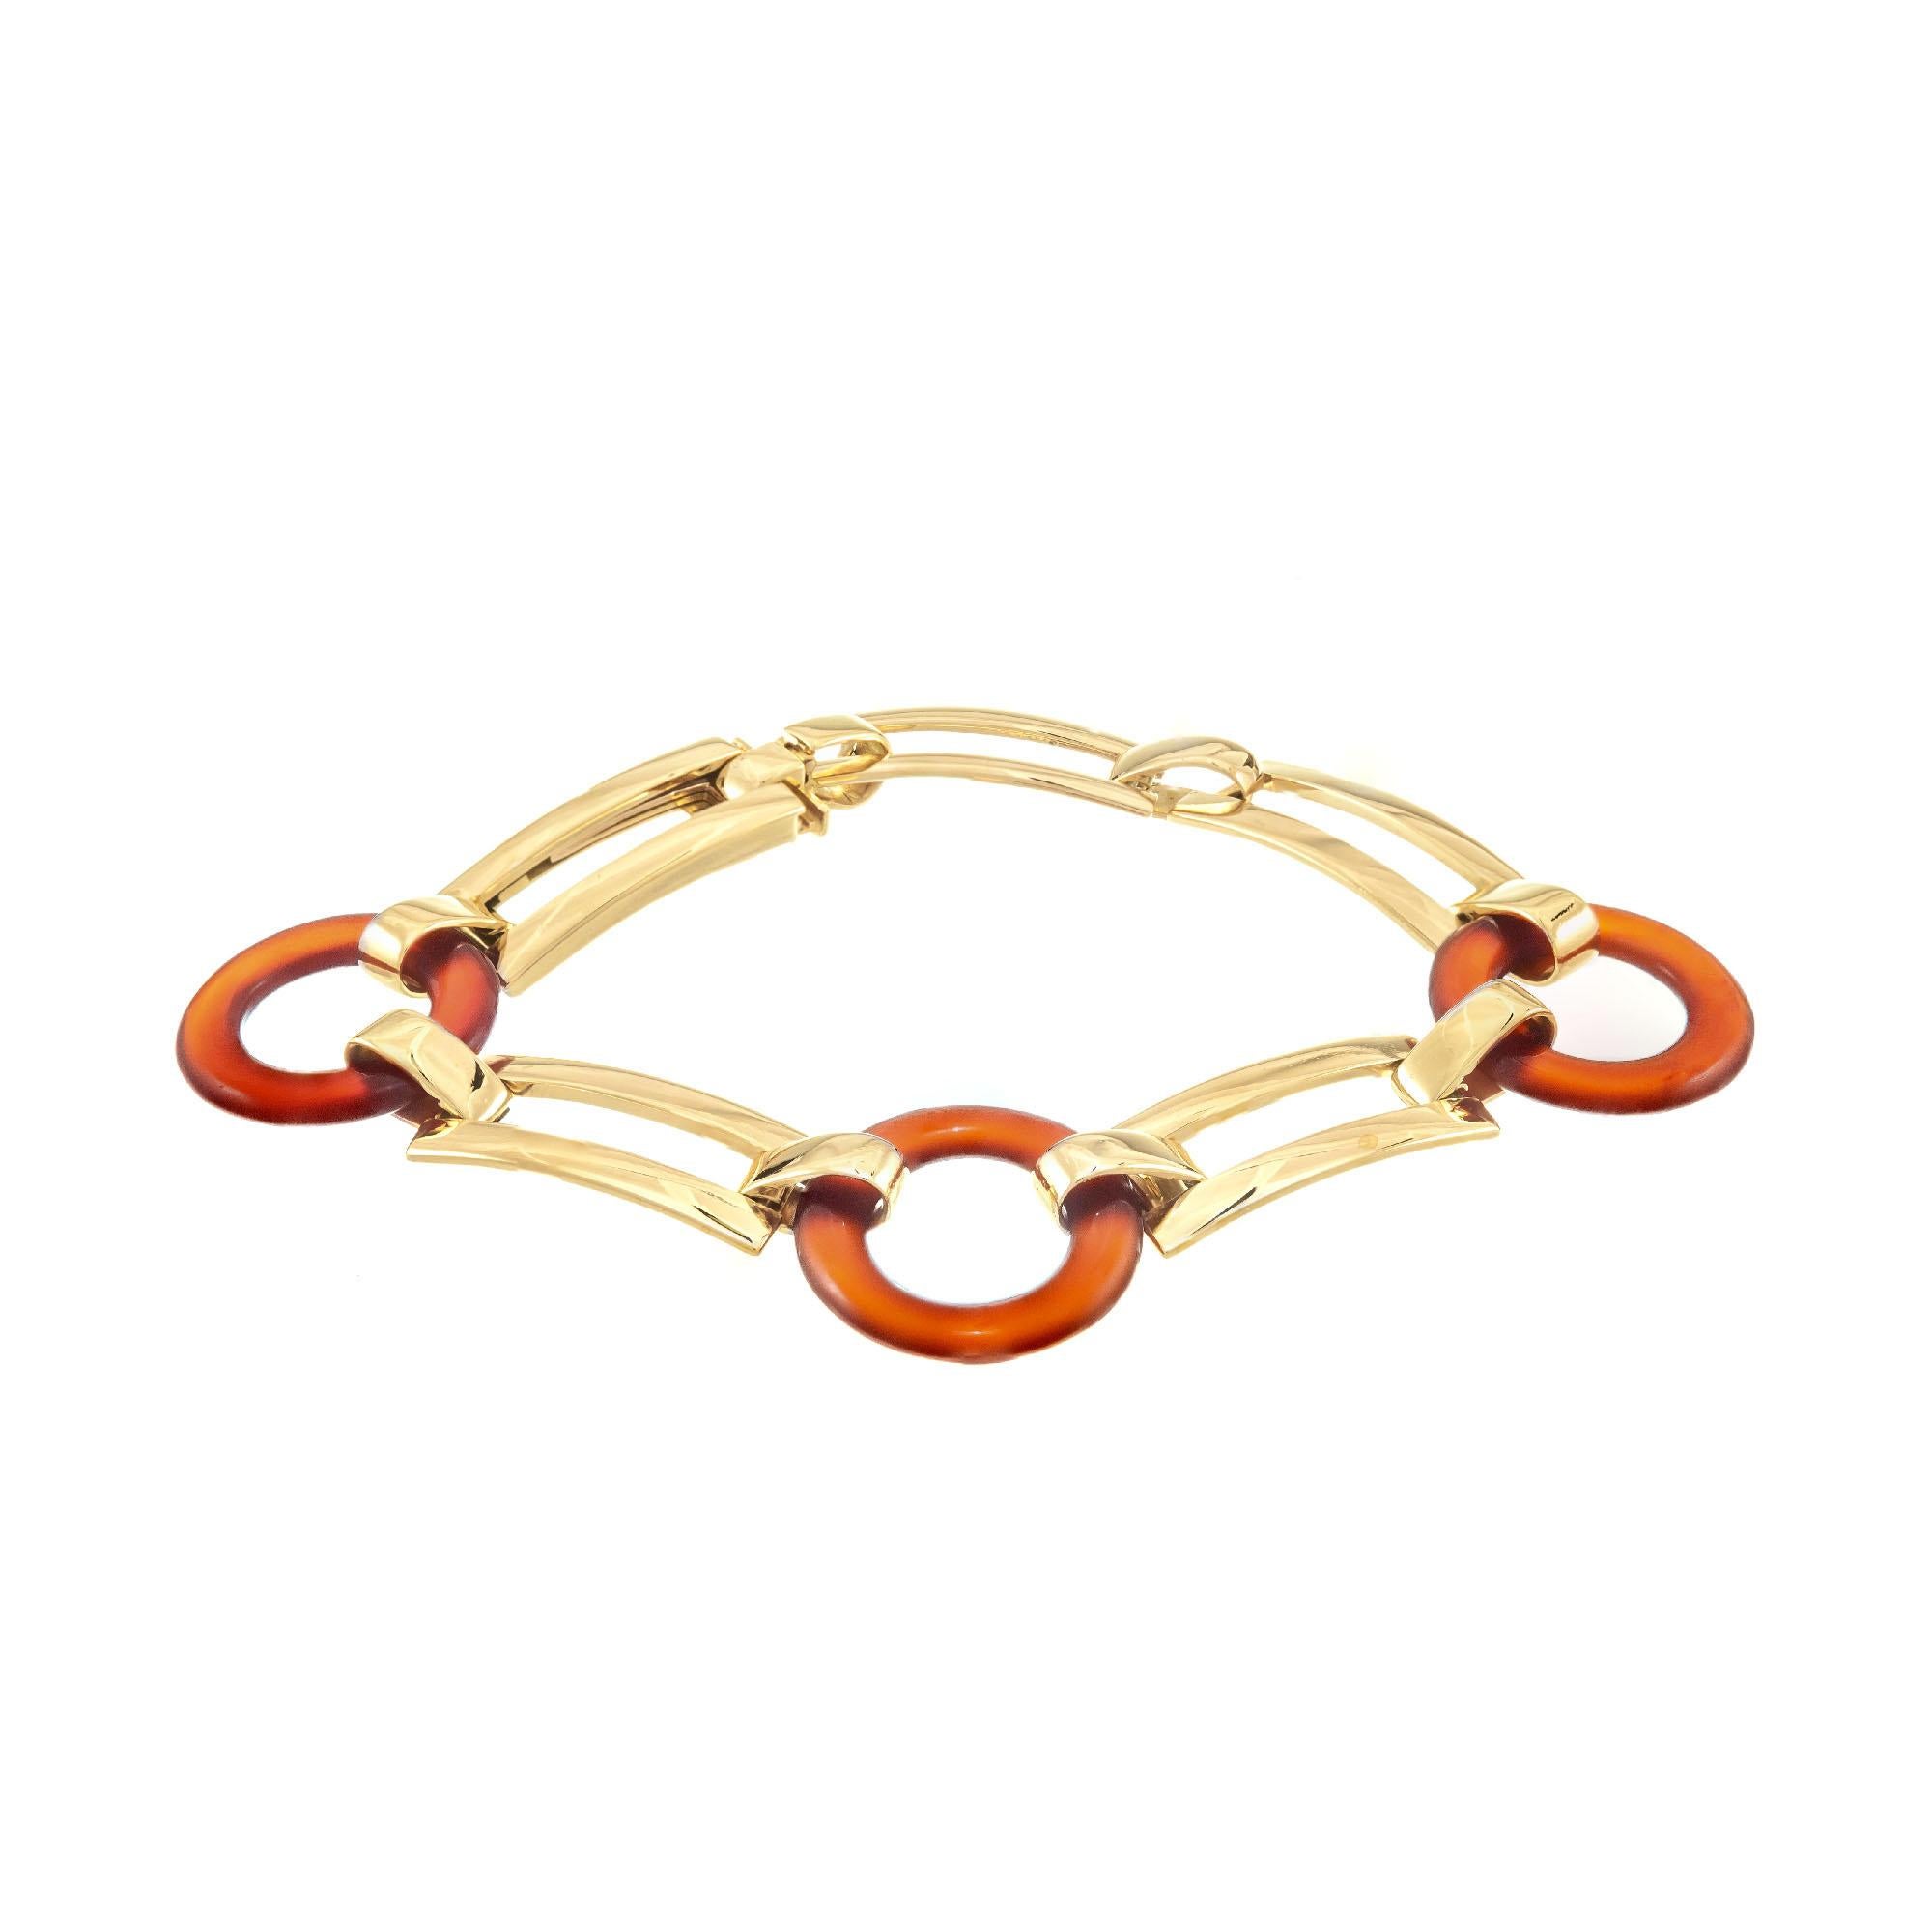 1930's Marzo Paris bracelet in 18k yellow gold with natural carnelian open circle links

3 round orange open carnelian discs 20.7 x 4.4x 2.78
18k yellow gold 
Stamped: Marzo Paris 
Hallmark: eagle hallmark
30.8 grams
Bracelet:  8 Inches

